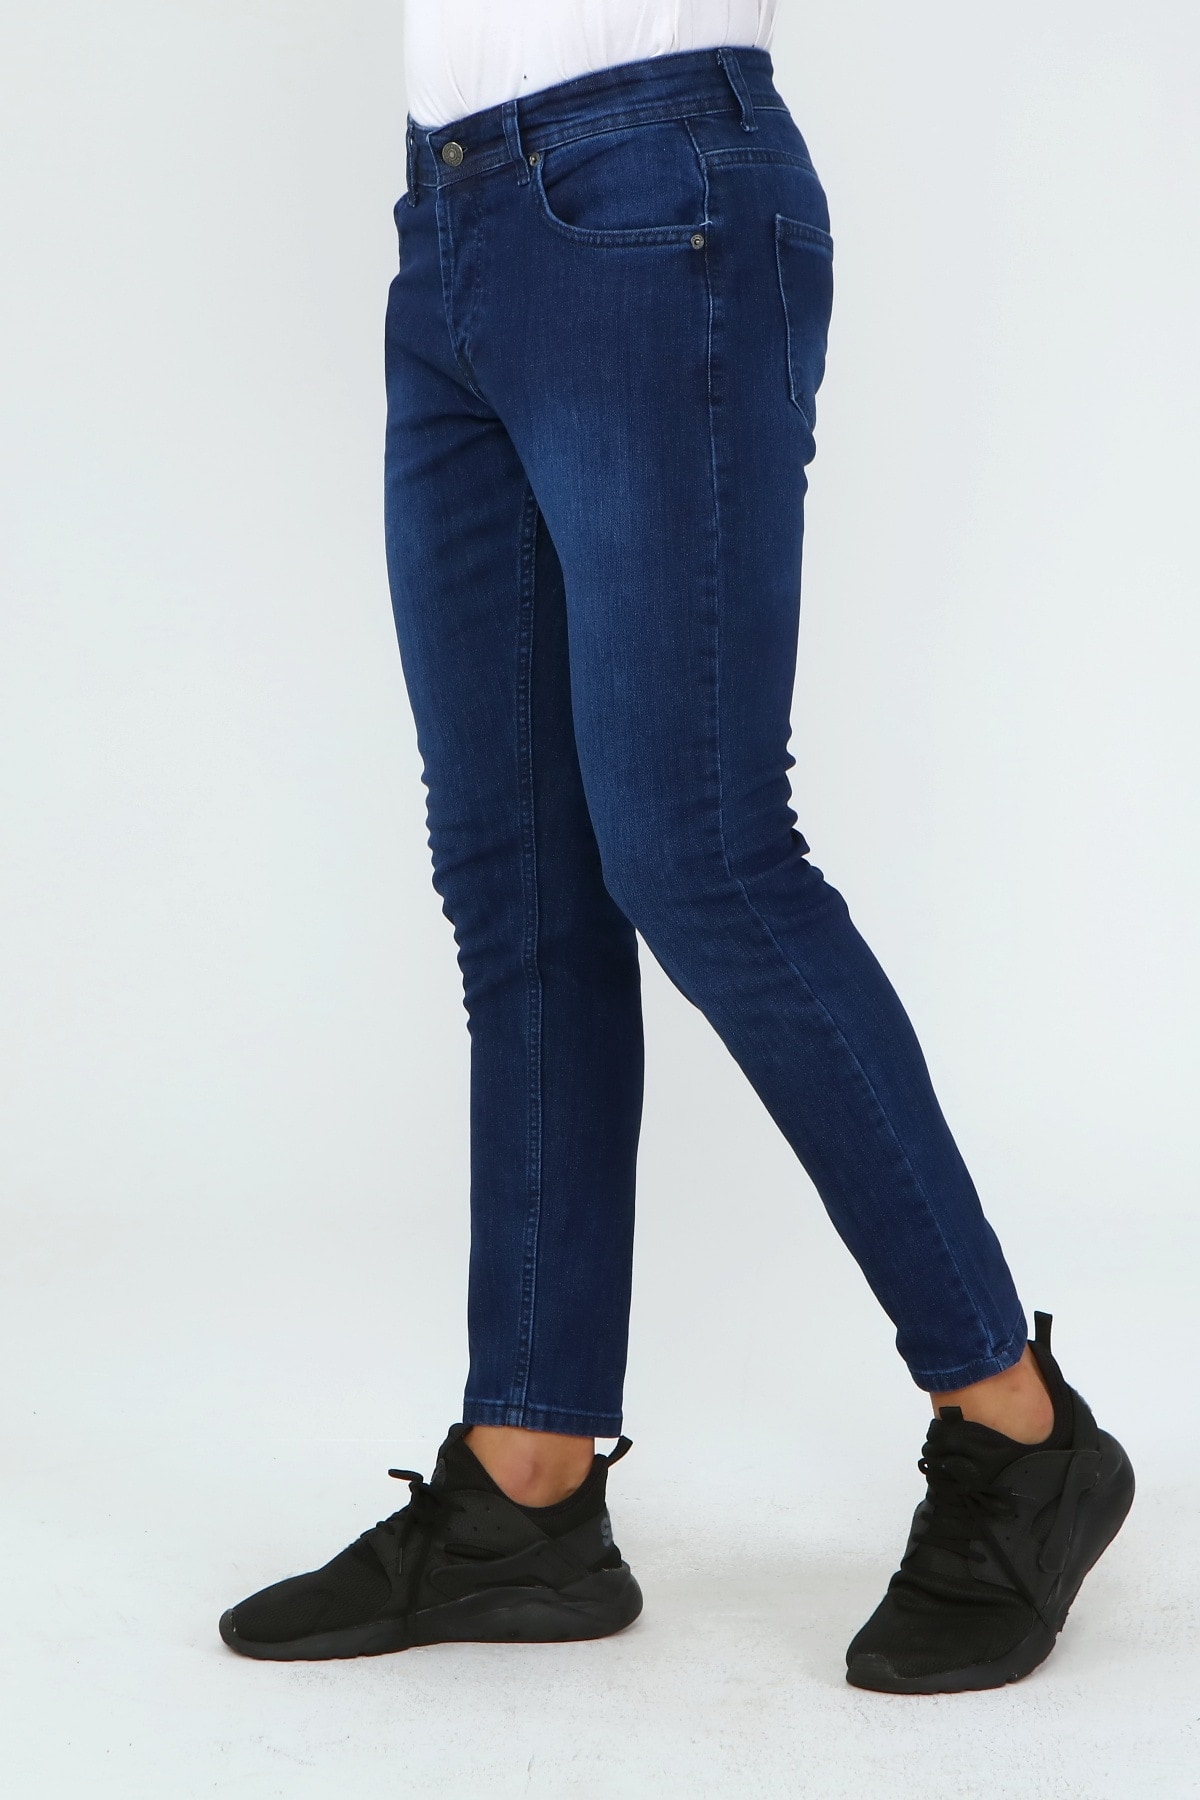 Wholesale Skinny No .11 - NTC Jeans Manufacturing - Wholesale - Wholesale